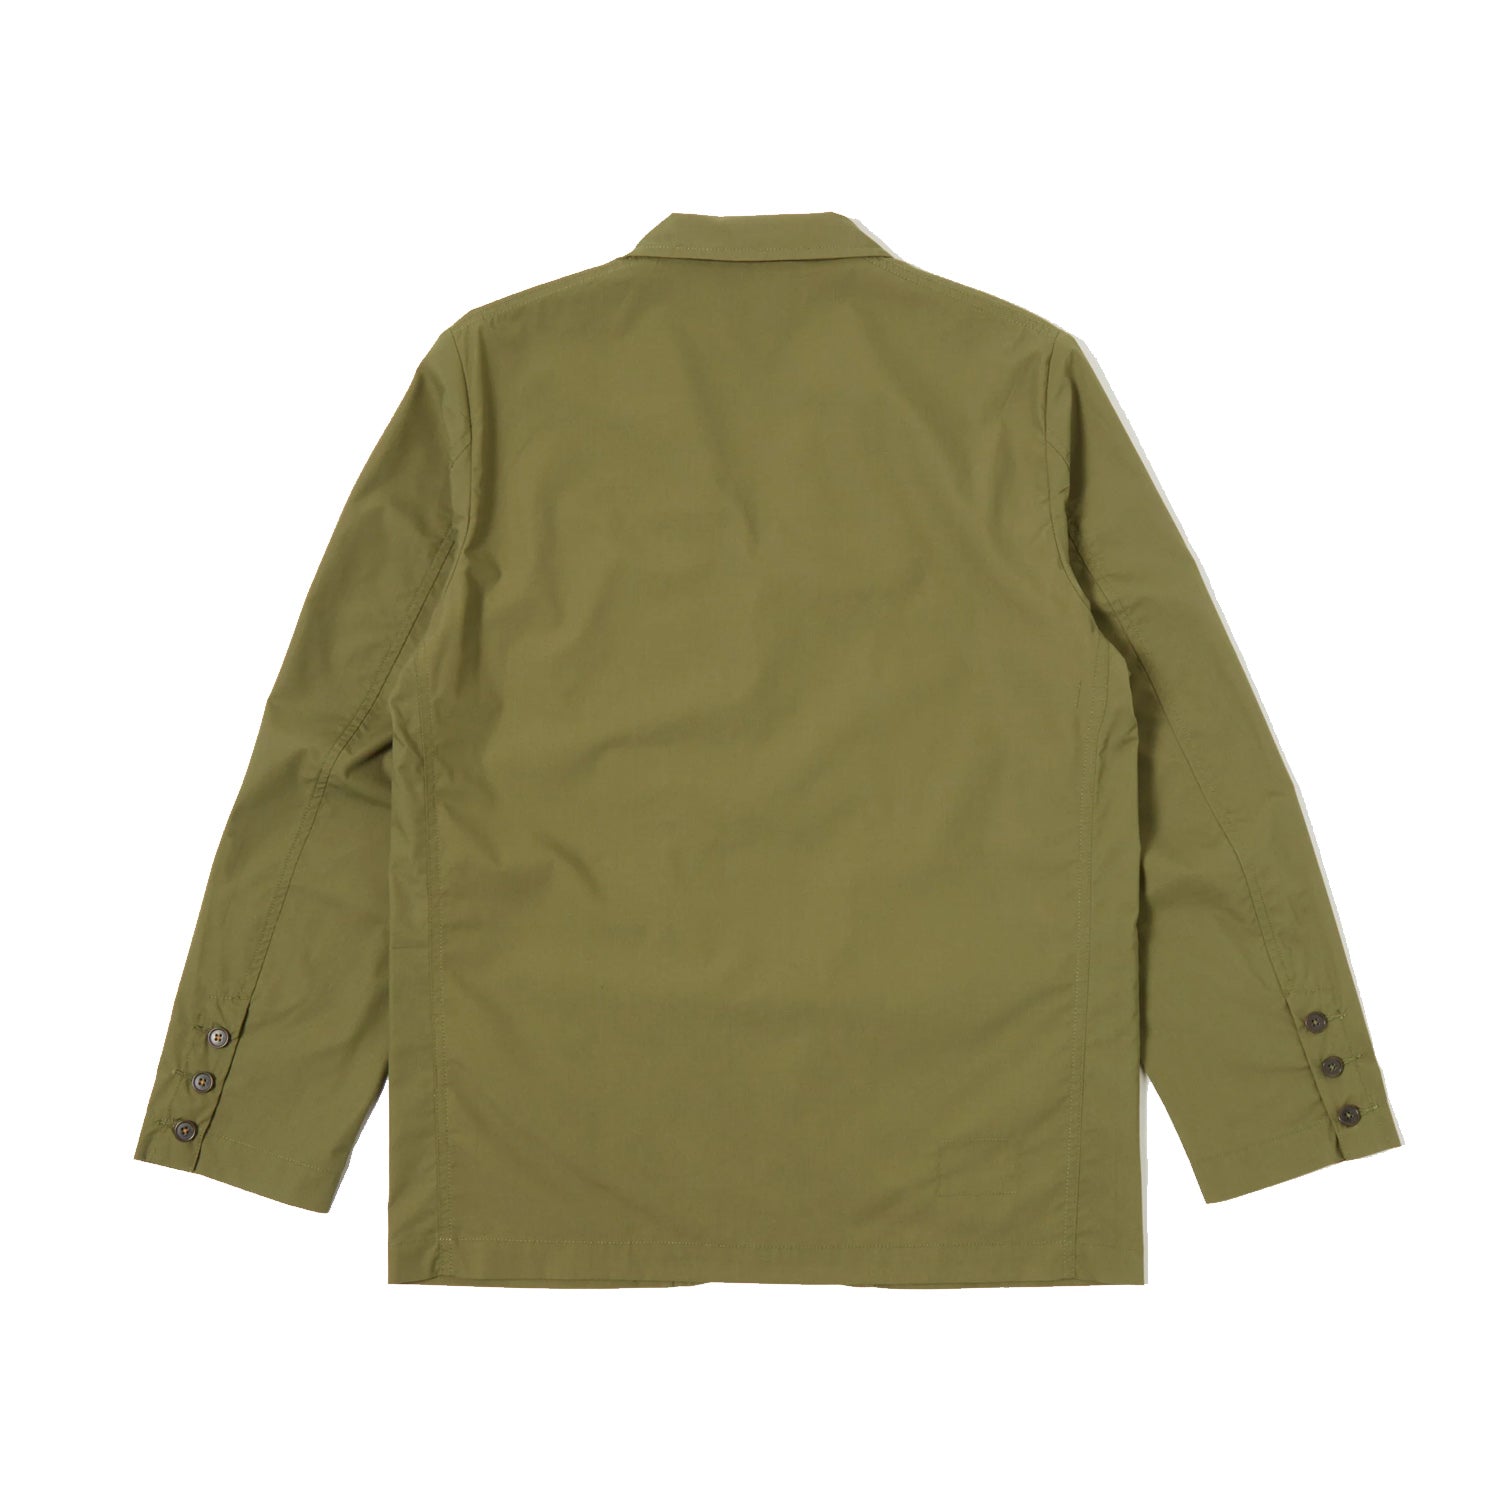 Capitol Jacket - Recycled Poly Tech